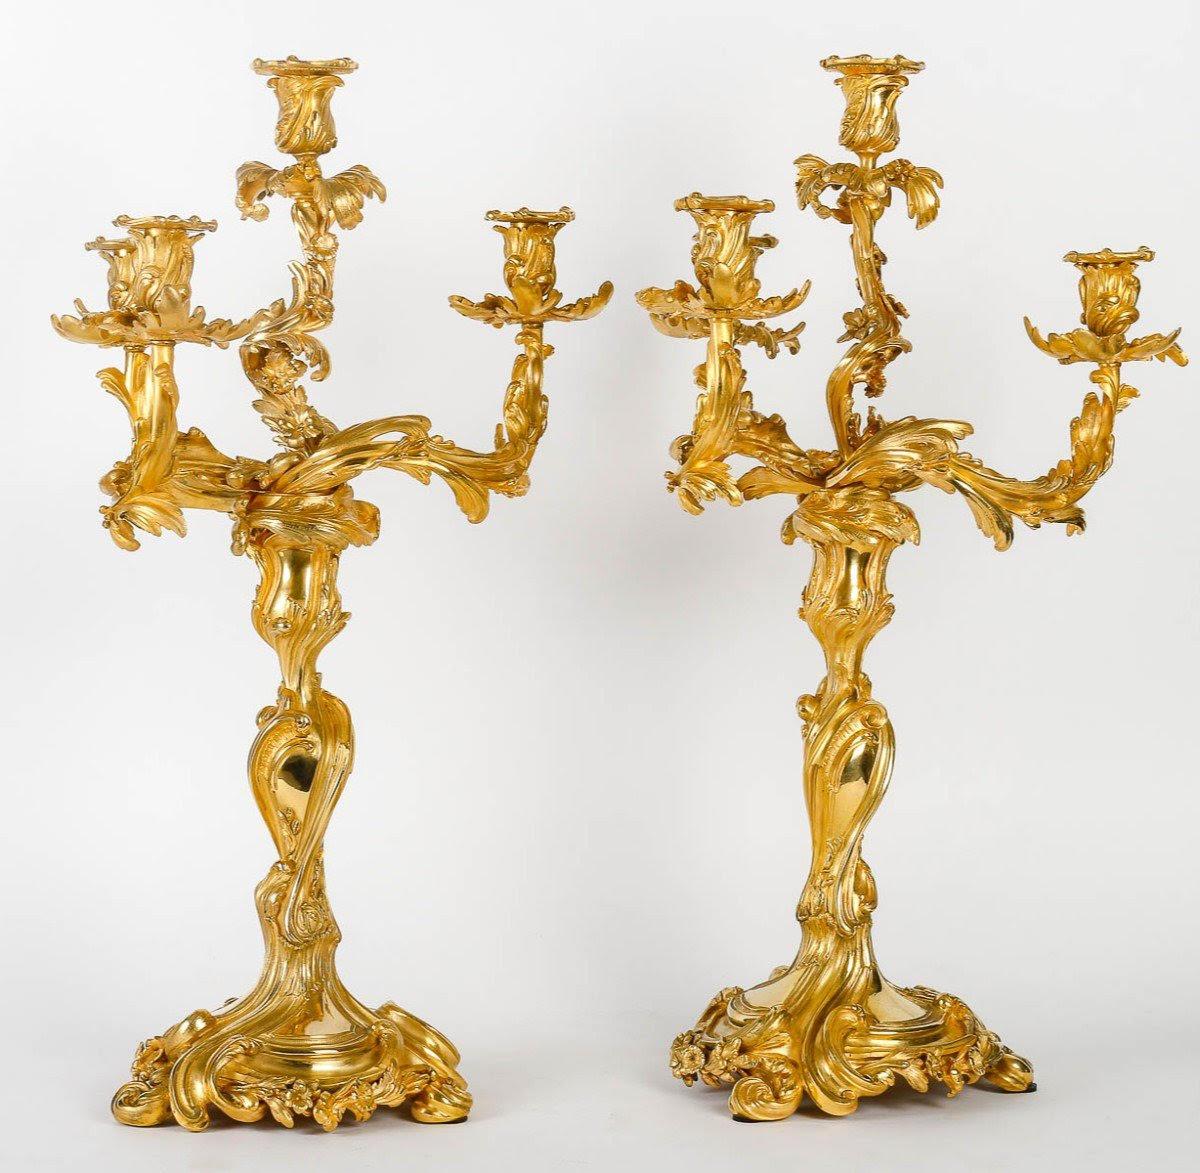 Pair of large ormolu candelabra, Louis XV style, 19th century.

Pair of Rocaille style Candelabras, Louis XV, 19th century in chased and gilt bronze, Napoleon III period.
h: 62.5cm, w: 39cm, d: 39cm